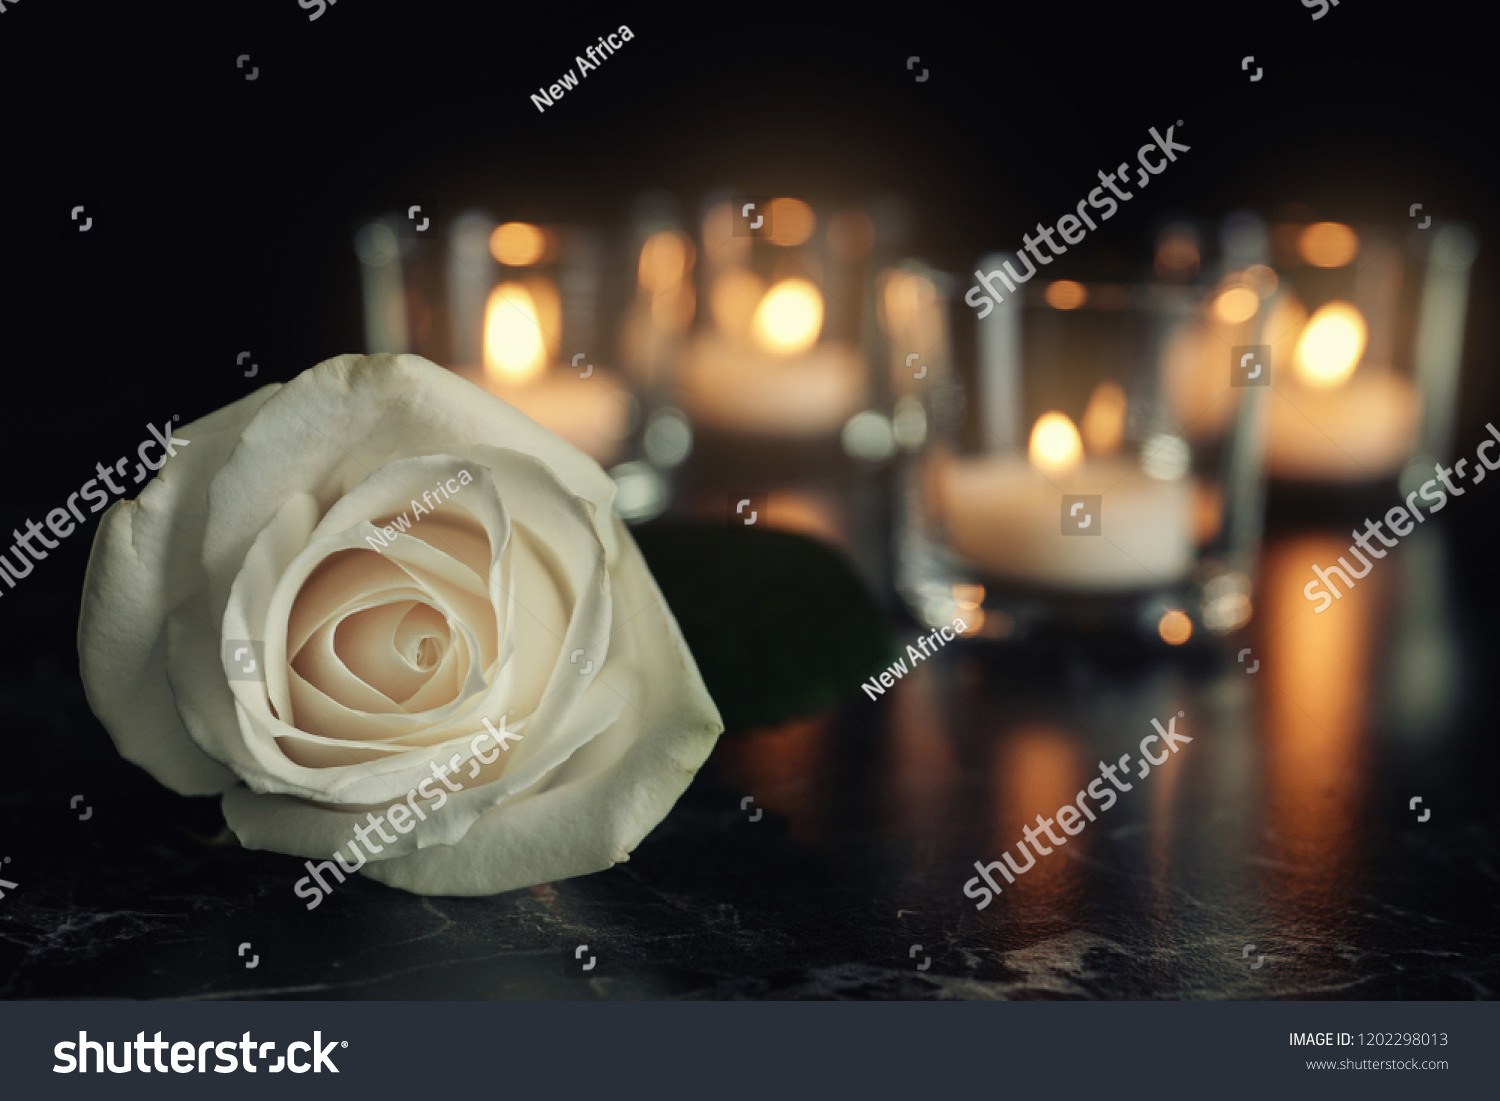 White rose and blurred burning candles on table in darkness, space for text. Funeral symbol #1202298013